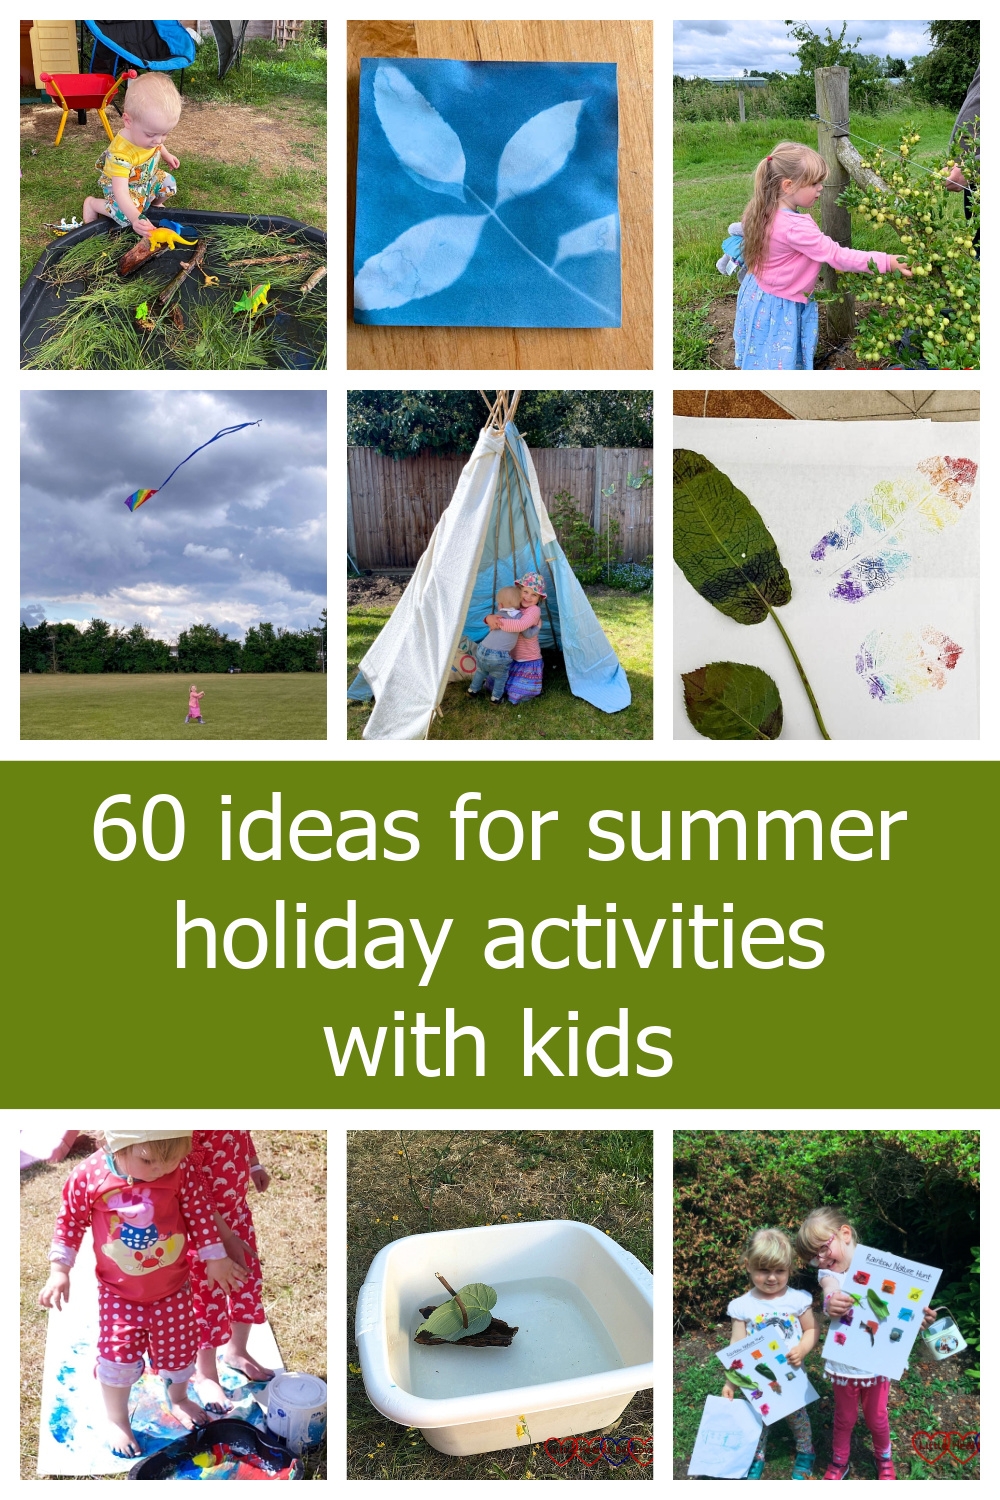 Thomas playing in a tuff tray dinosaur swamp; a sun print of leaves; Sophie picking gooseberries; Sophie flying a kite; Sophie and Thomas in a tepee in the garden; rainbow leaf prints; Sophie and Jessica doing footprint painting; a bark boat; Sophie and Jessica holding up their rainbow nature hunt sheets - "60 ideas for summer holiday activities with kids"